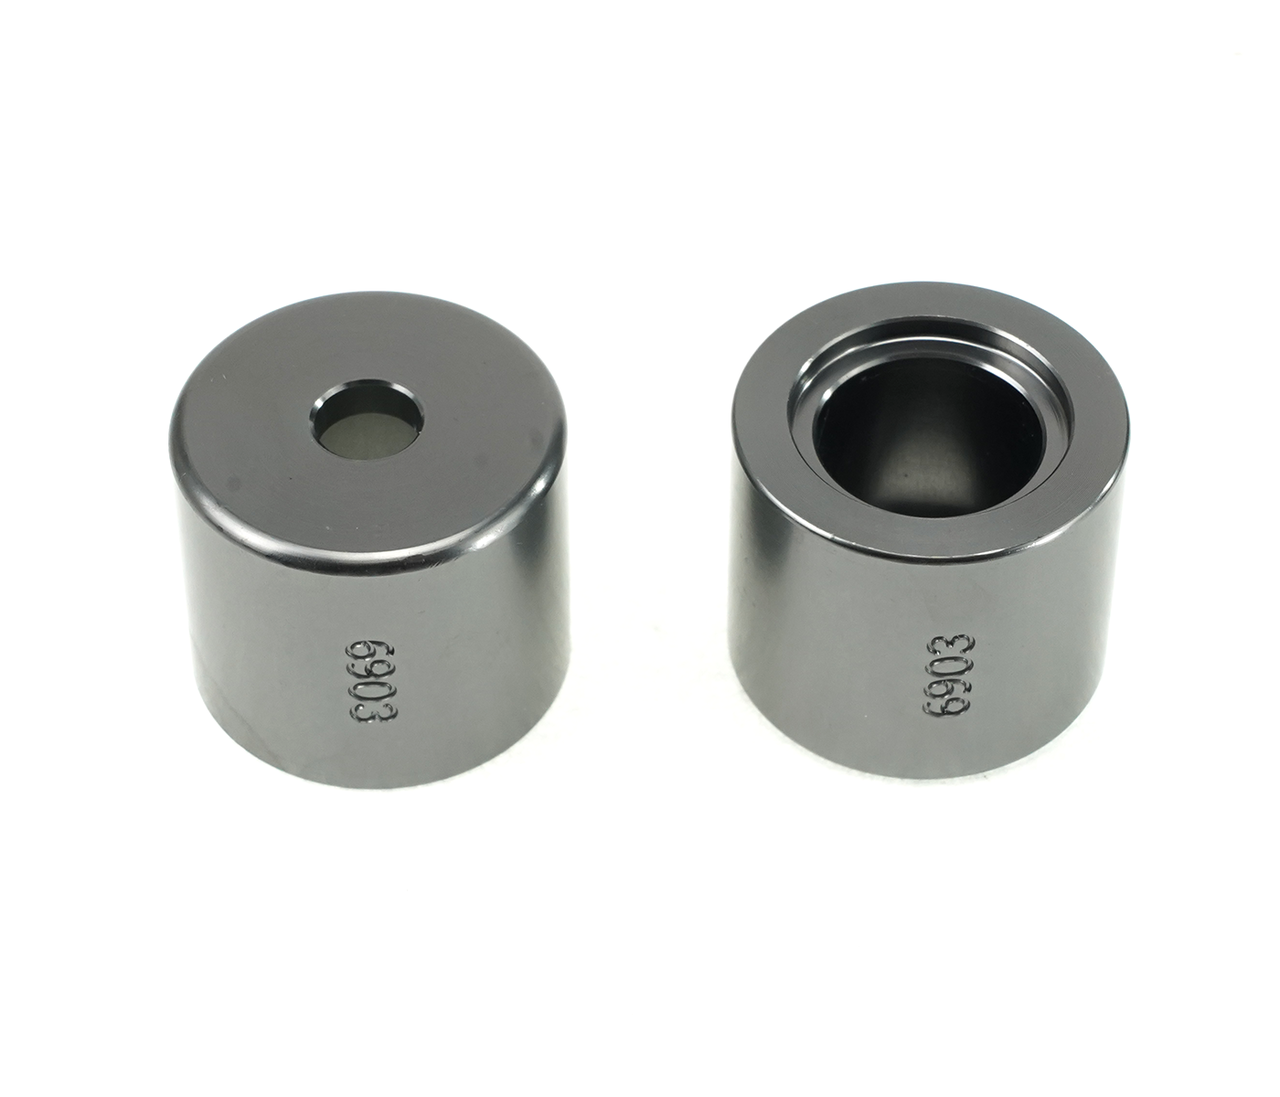 Enduro HT 6903 Outer - Outer Bearing Guide for Bearing Press (BRT-005 or BRT-050) - single guide only